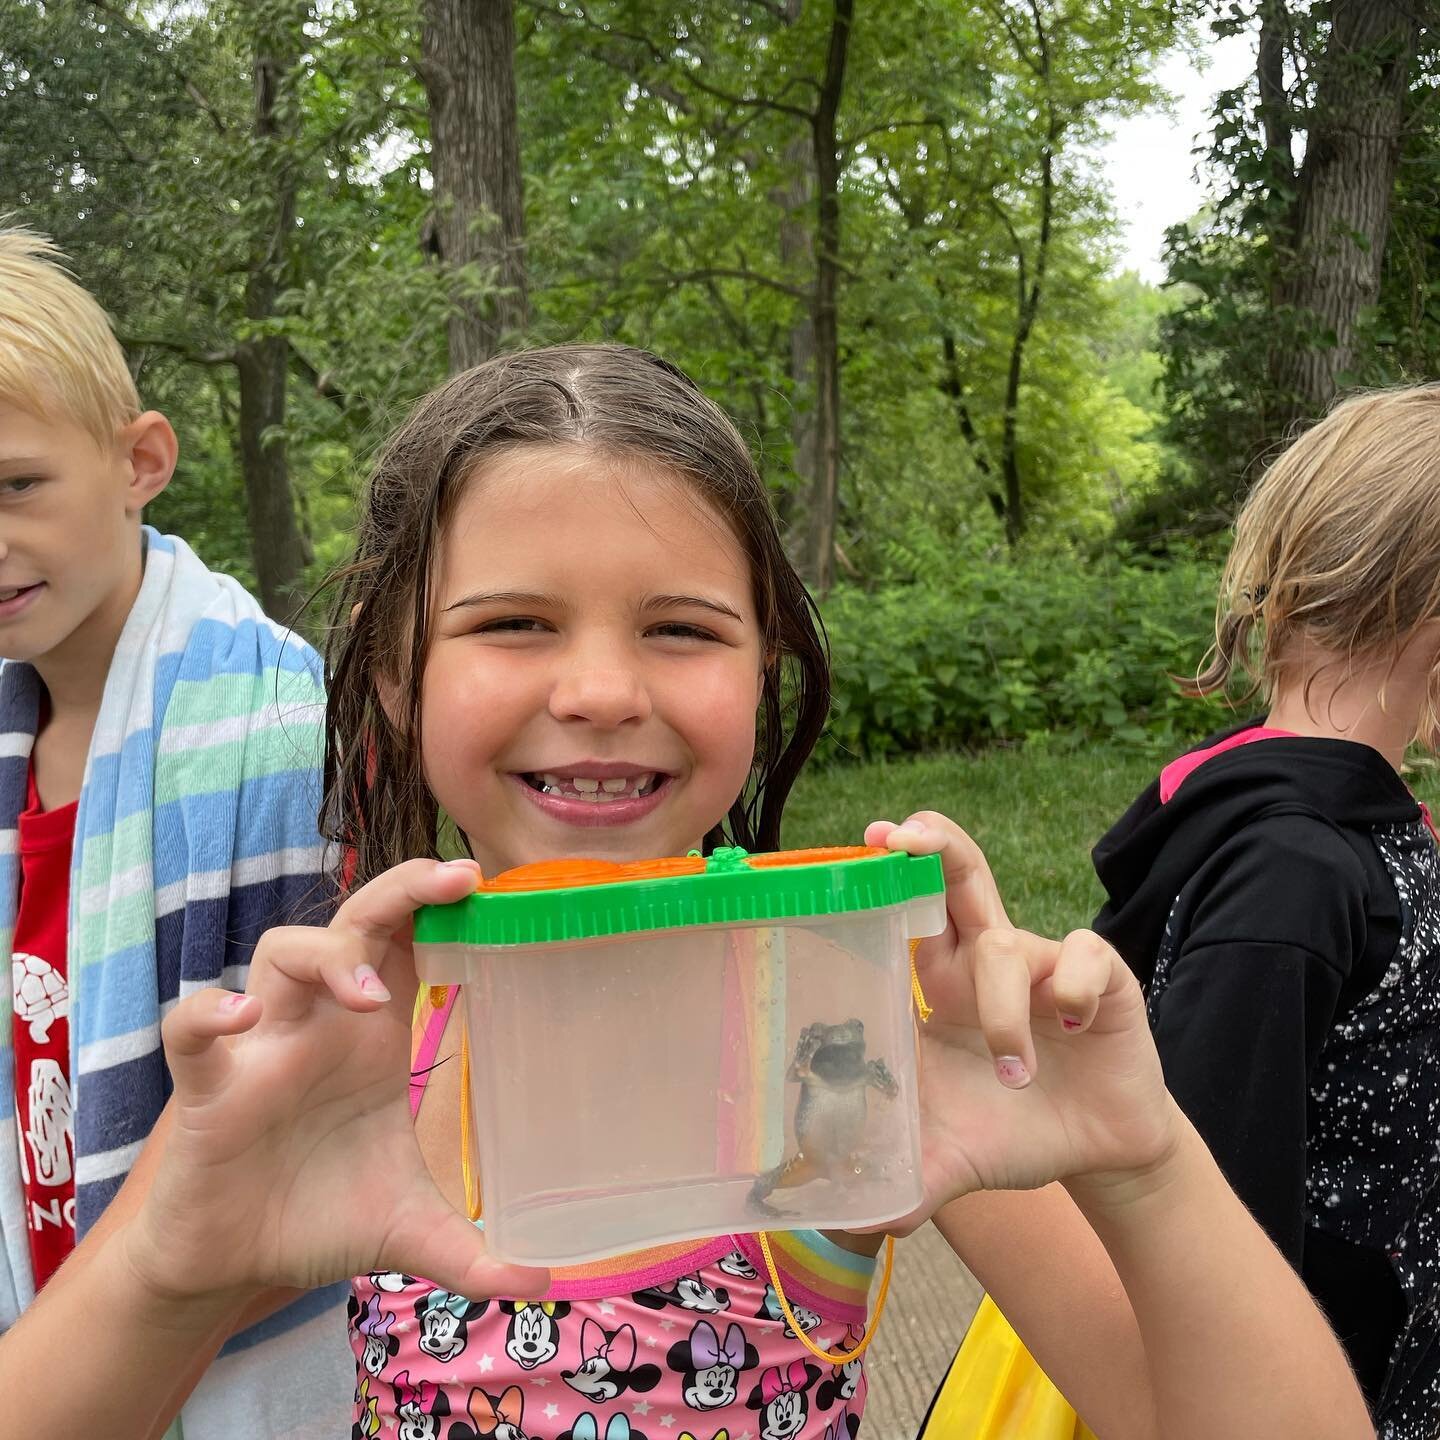 A camp we have been exploring the wildlife and nature we have right here in Nebraska. On our wildlife hikes this week we have spotted snakes, tons of snails, toads, katydids, tons of delicious mulberry&rsquo;s, mushrooms and many different species of